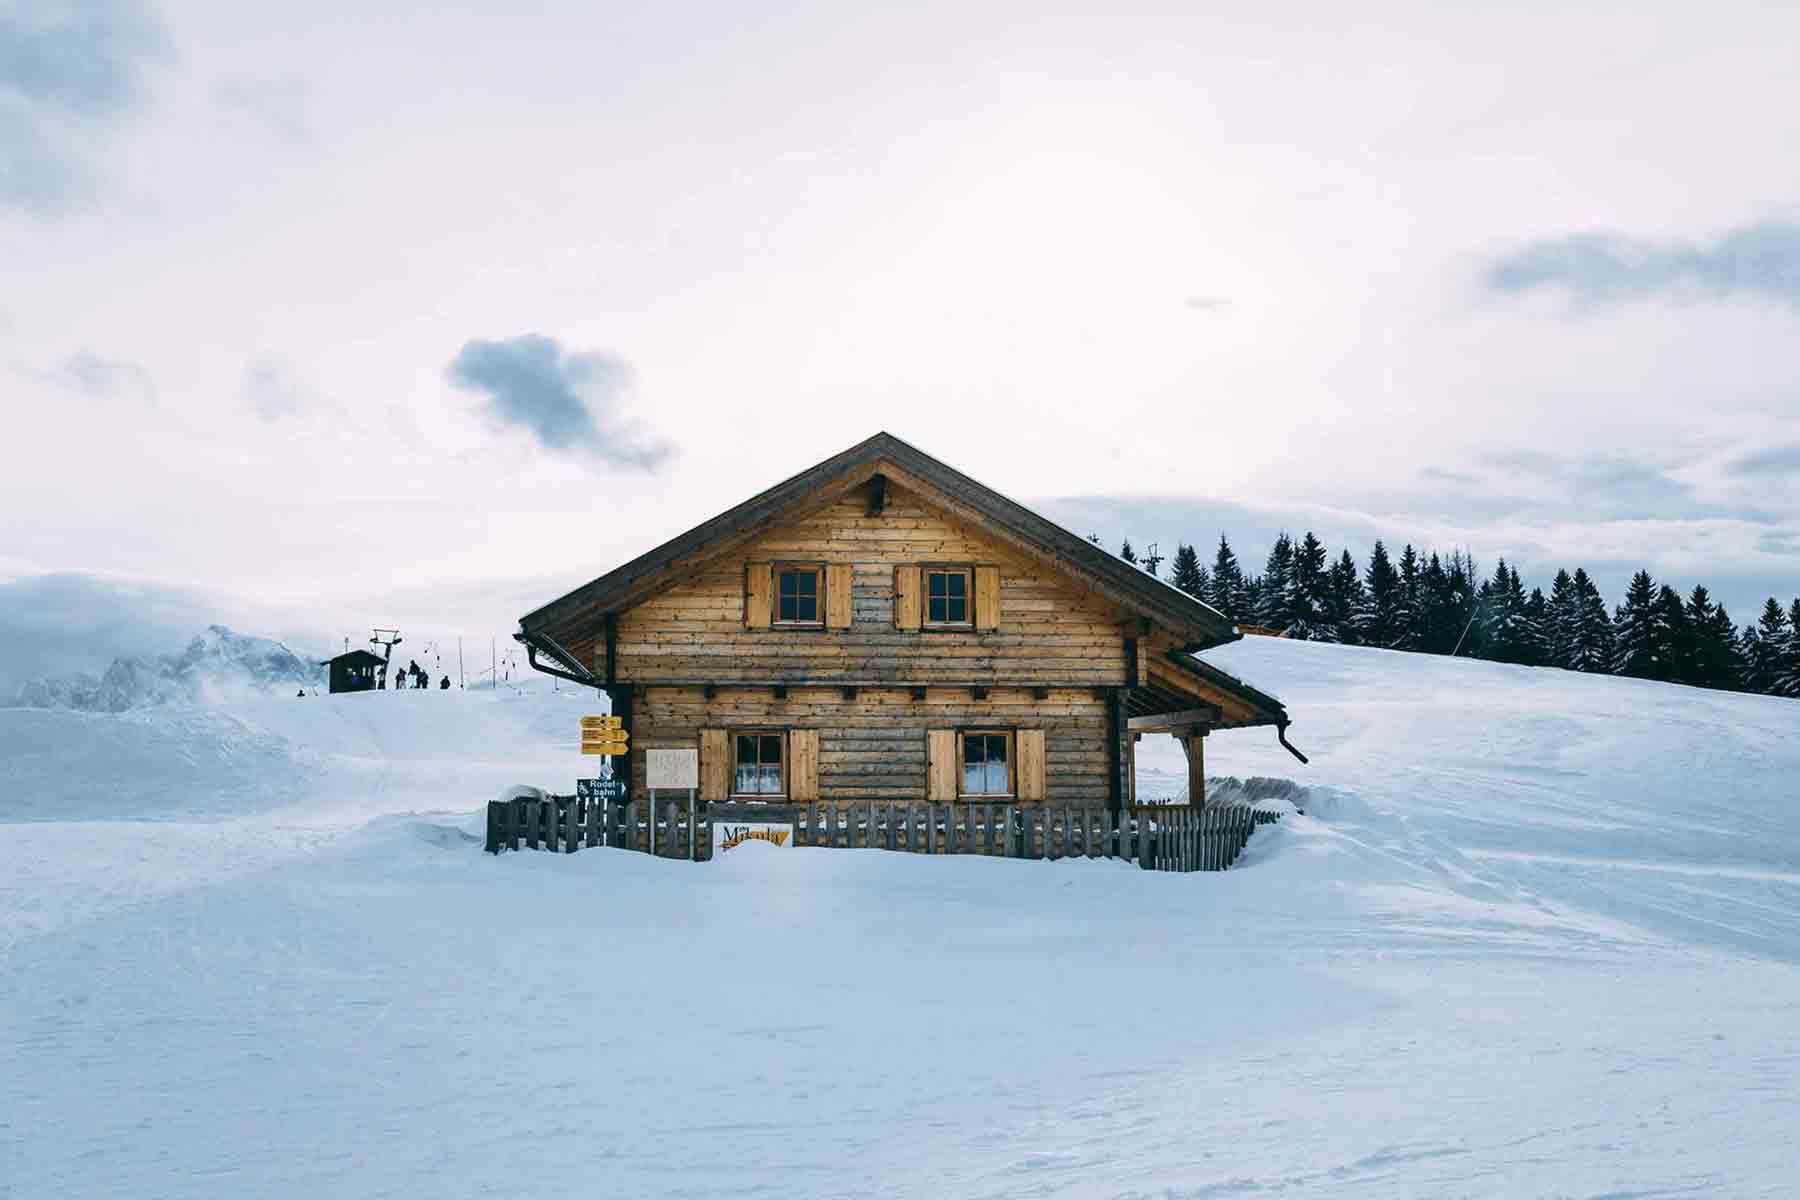 Wood cabin on hill surrounded by snow